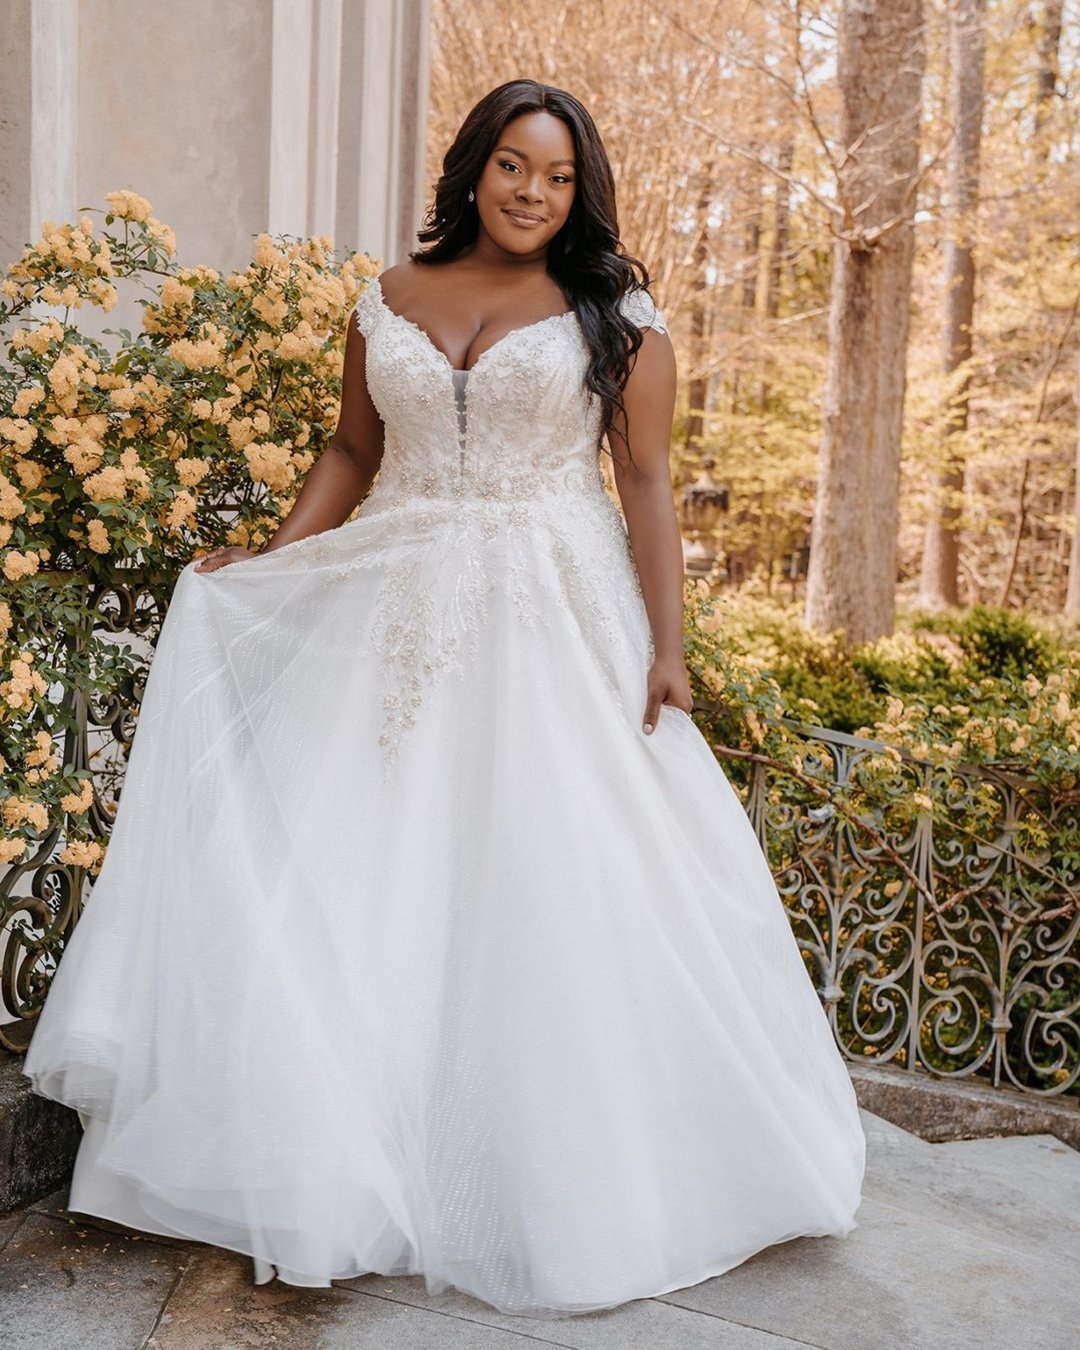 PLUS-SIZE WEDDING DRESSES: A JAW-DROPPING GUIDE